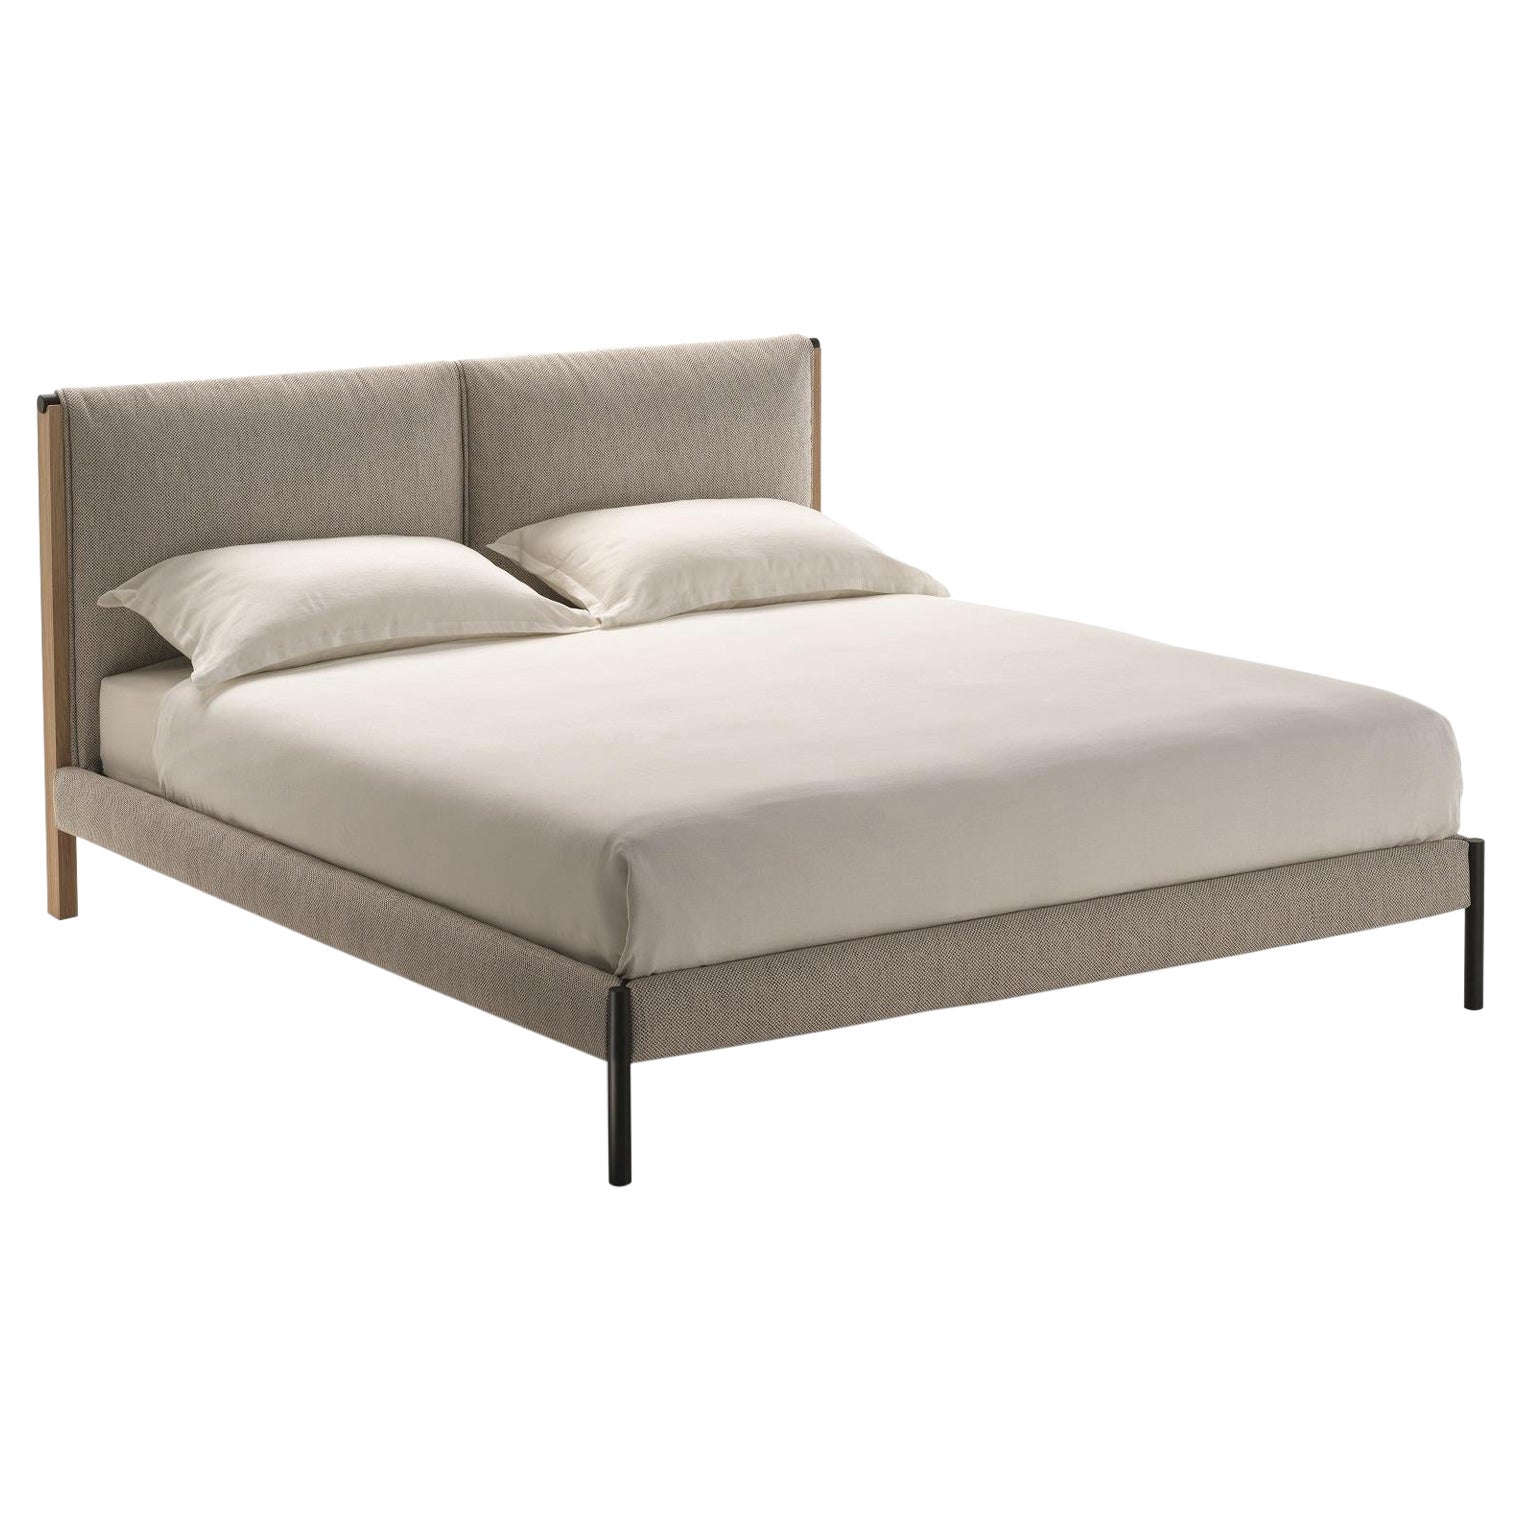 Zanotta Medium Ricordi Bed with Single Springing in Toce Upholstery For Sale